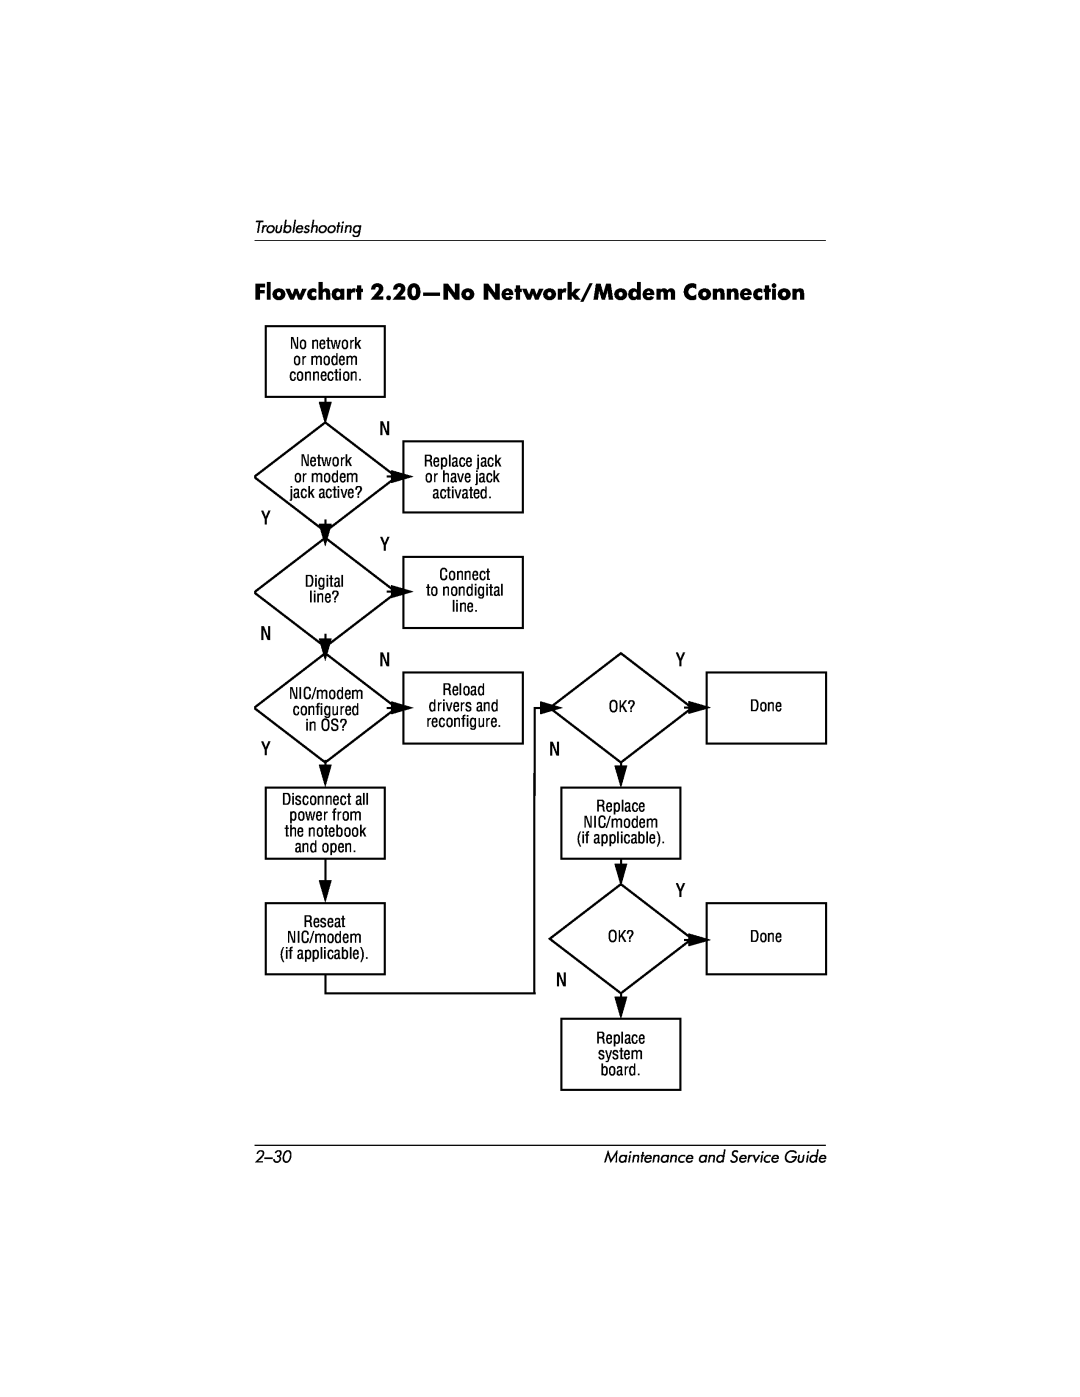 HP X1000, nx7000 Flowchart 2.20-No Network/Modem Connection, Troubleshooting, 2-30, Replace jack or have jack activated 